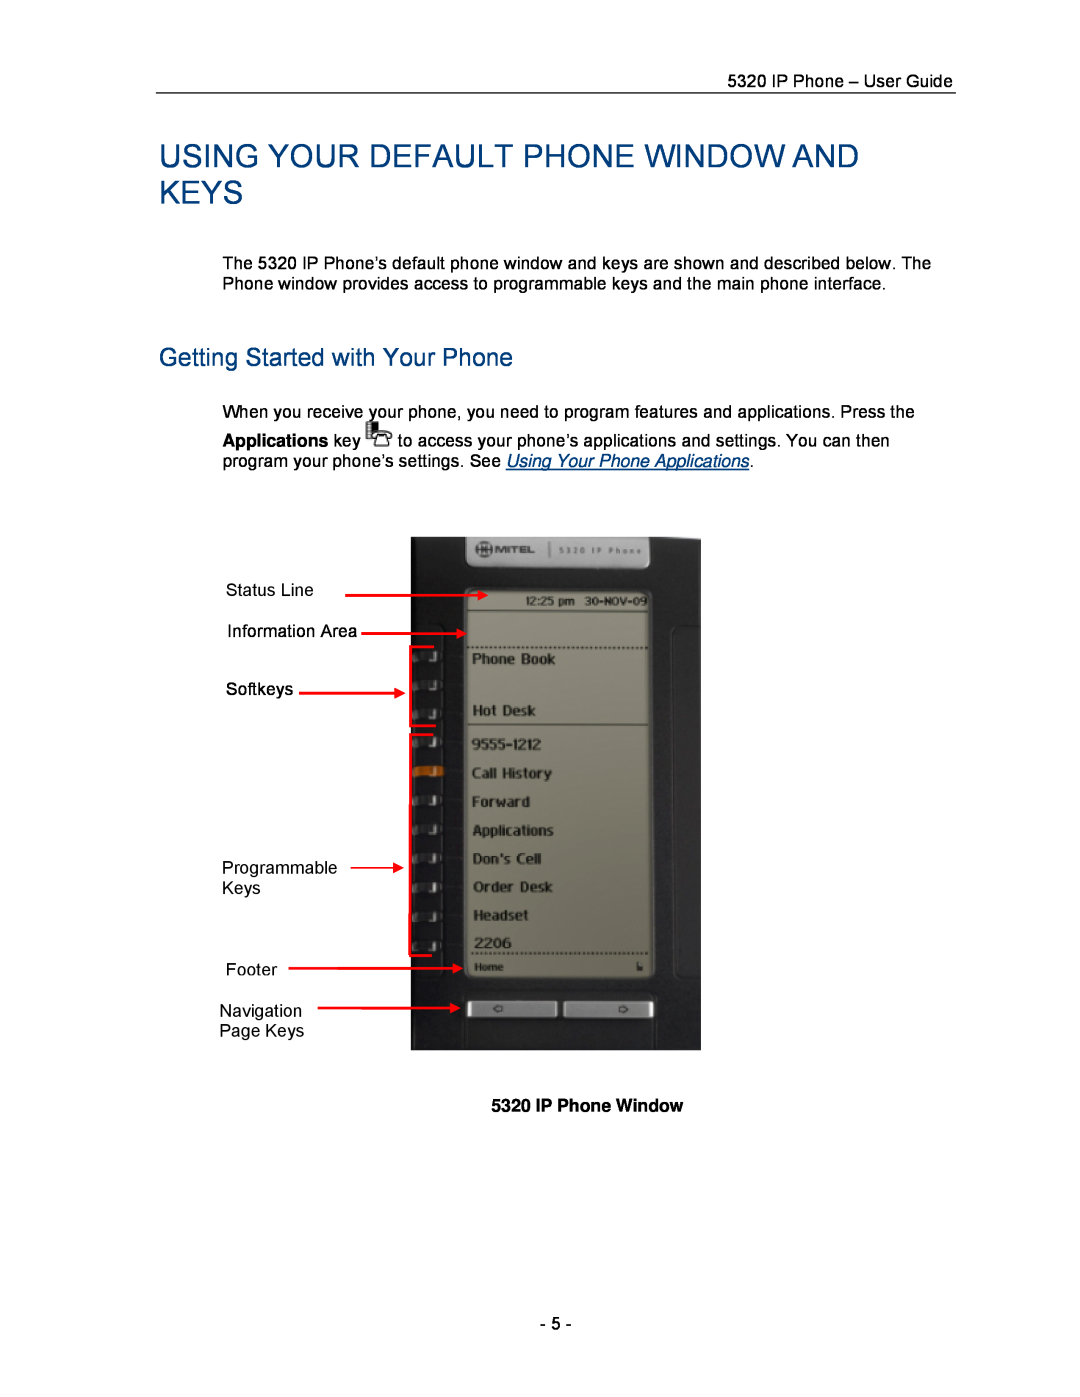 Mitel 5320 manual Using Your Default Phone Window And Keys, Getting Started with Your Phone, IP Phone Window 